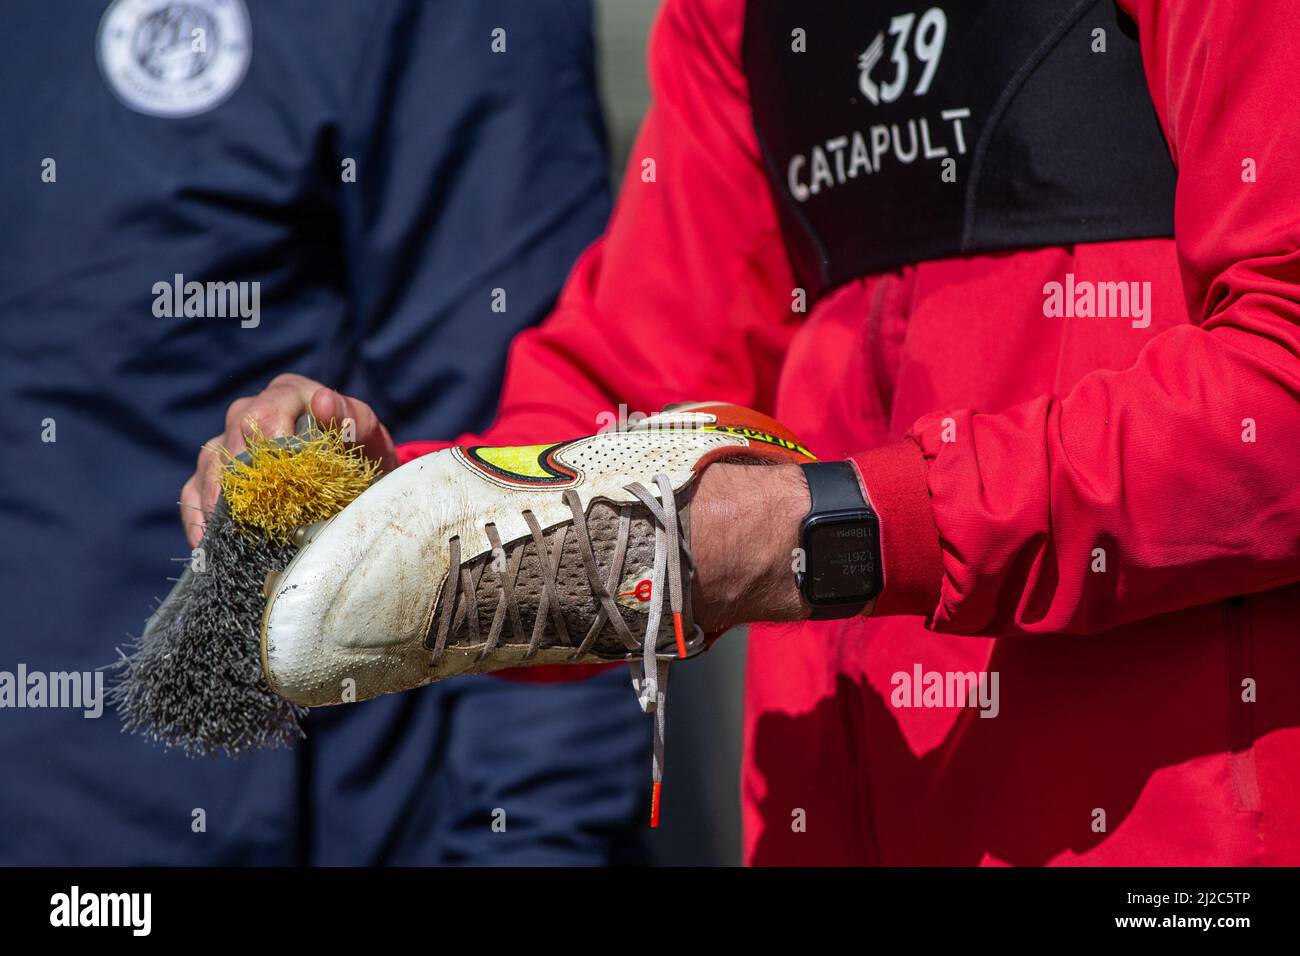 Football / soccer boots being cleaned by players Stock Photo